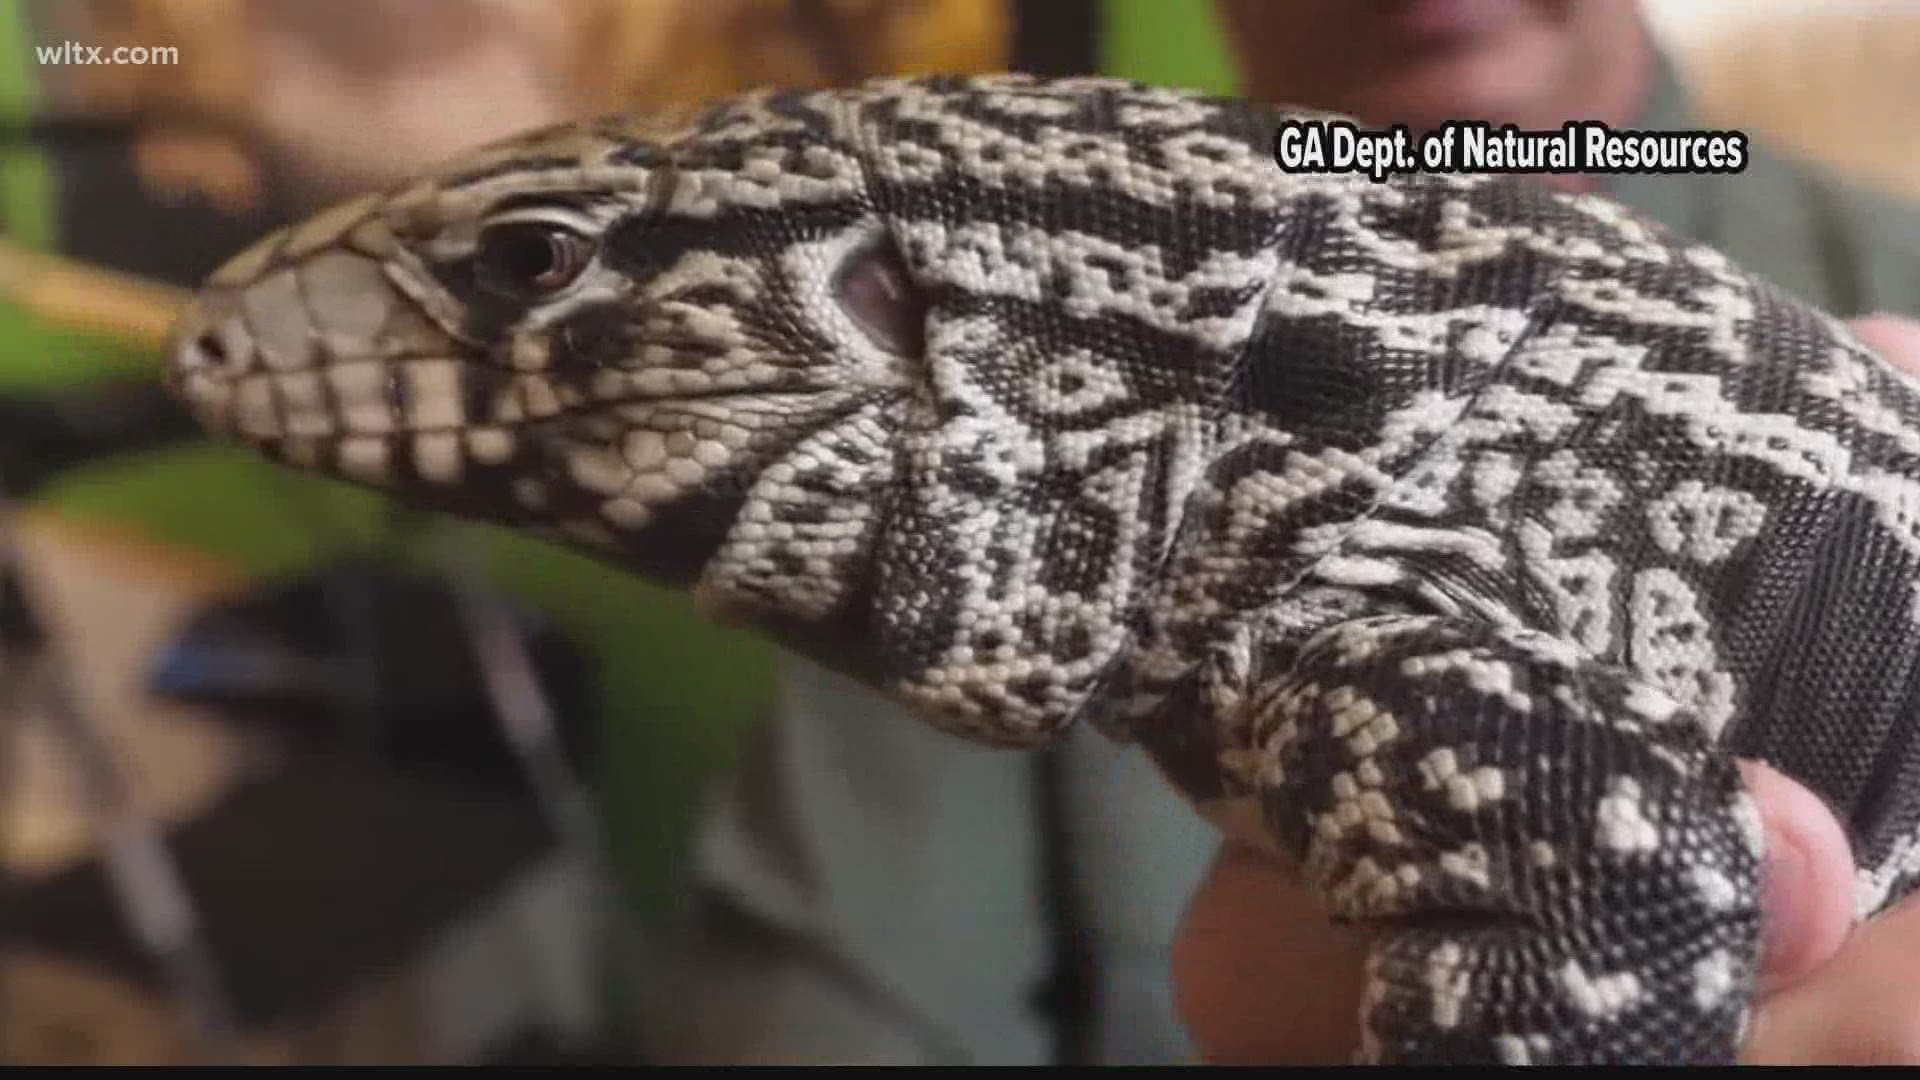 The Black and White Tegu Lizard has been seen in Florida and Georgia as well.